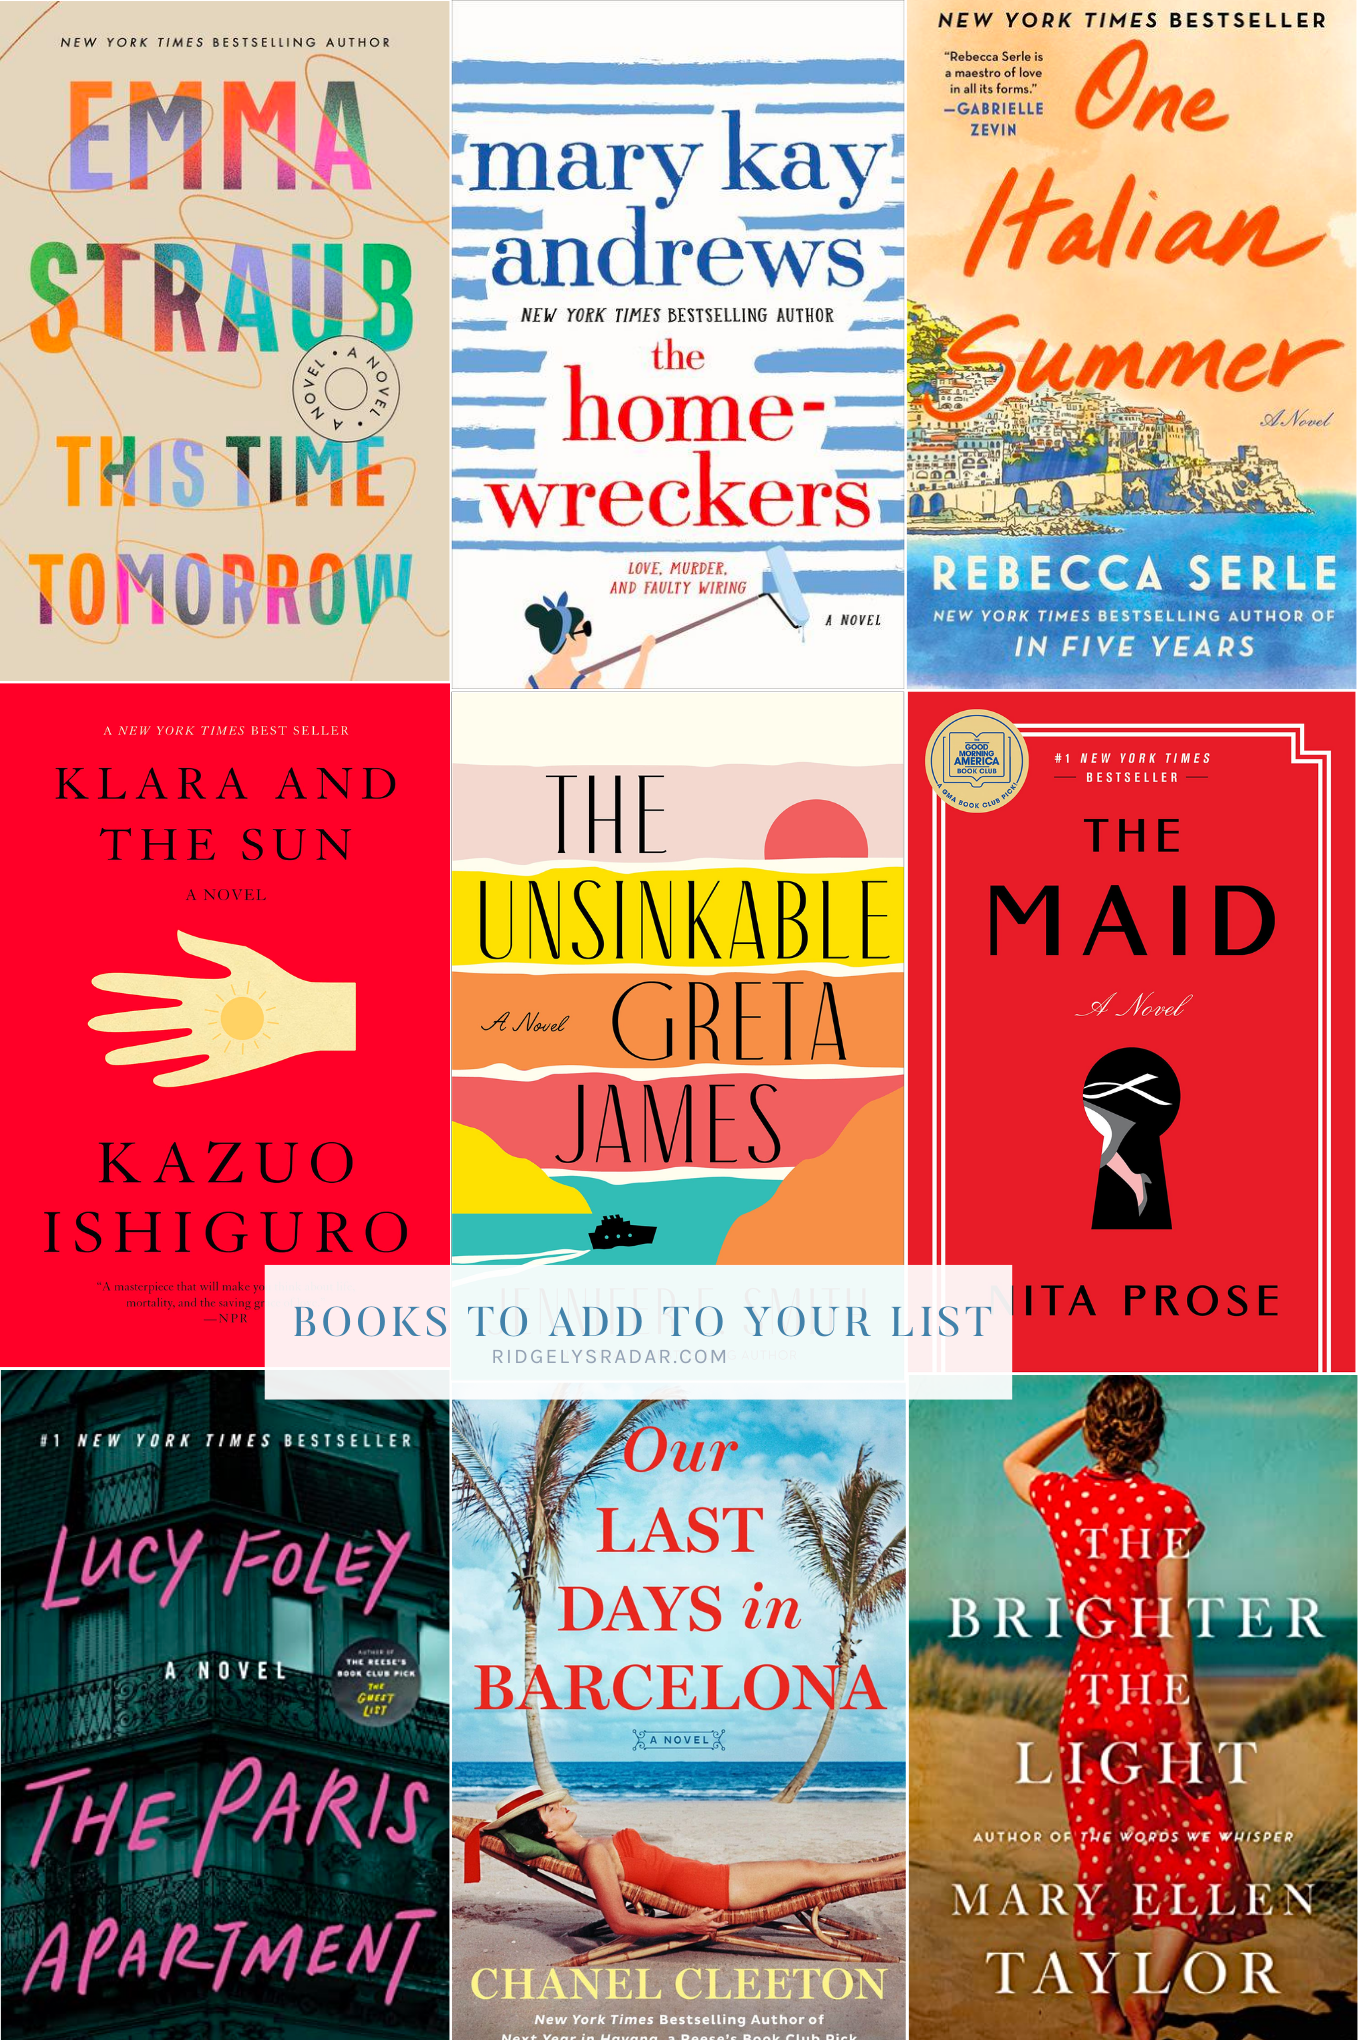 Want to load up your Kindle with great Books? Here are bestsellers, new releases and some recommended favorites to read now!